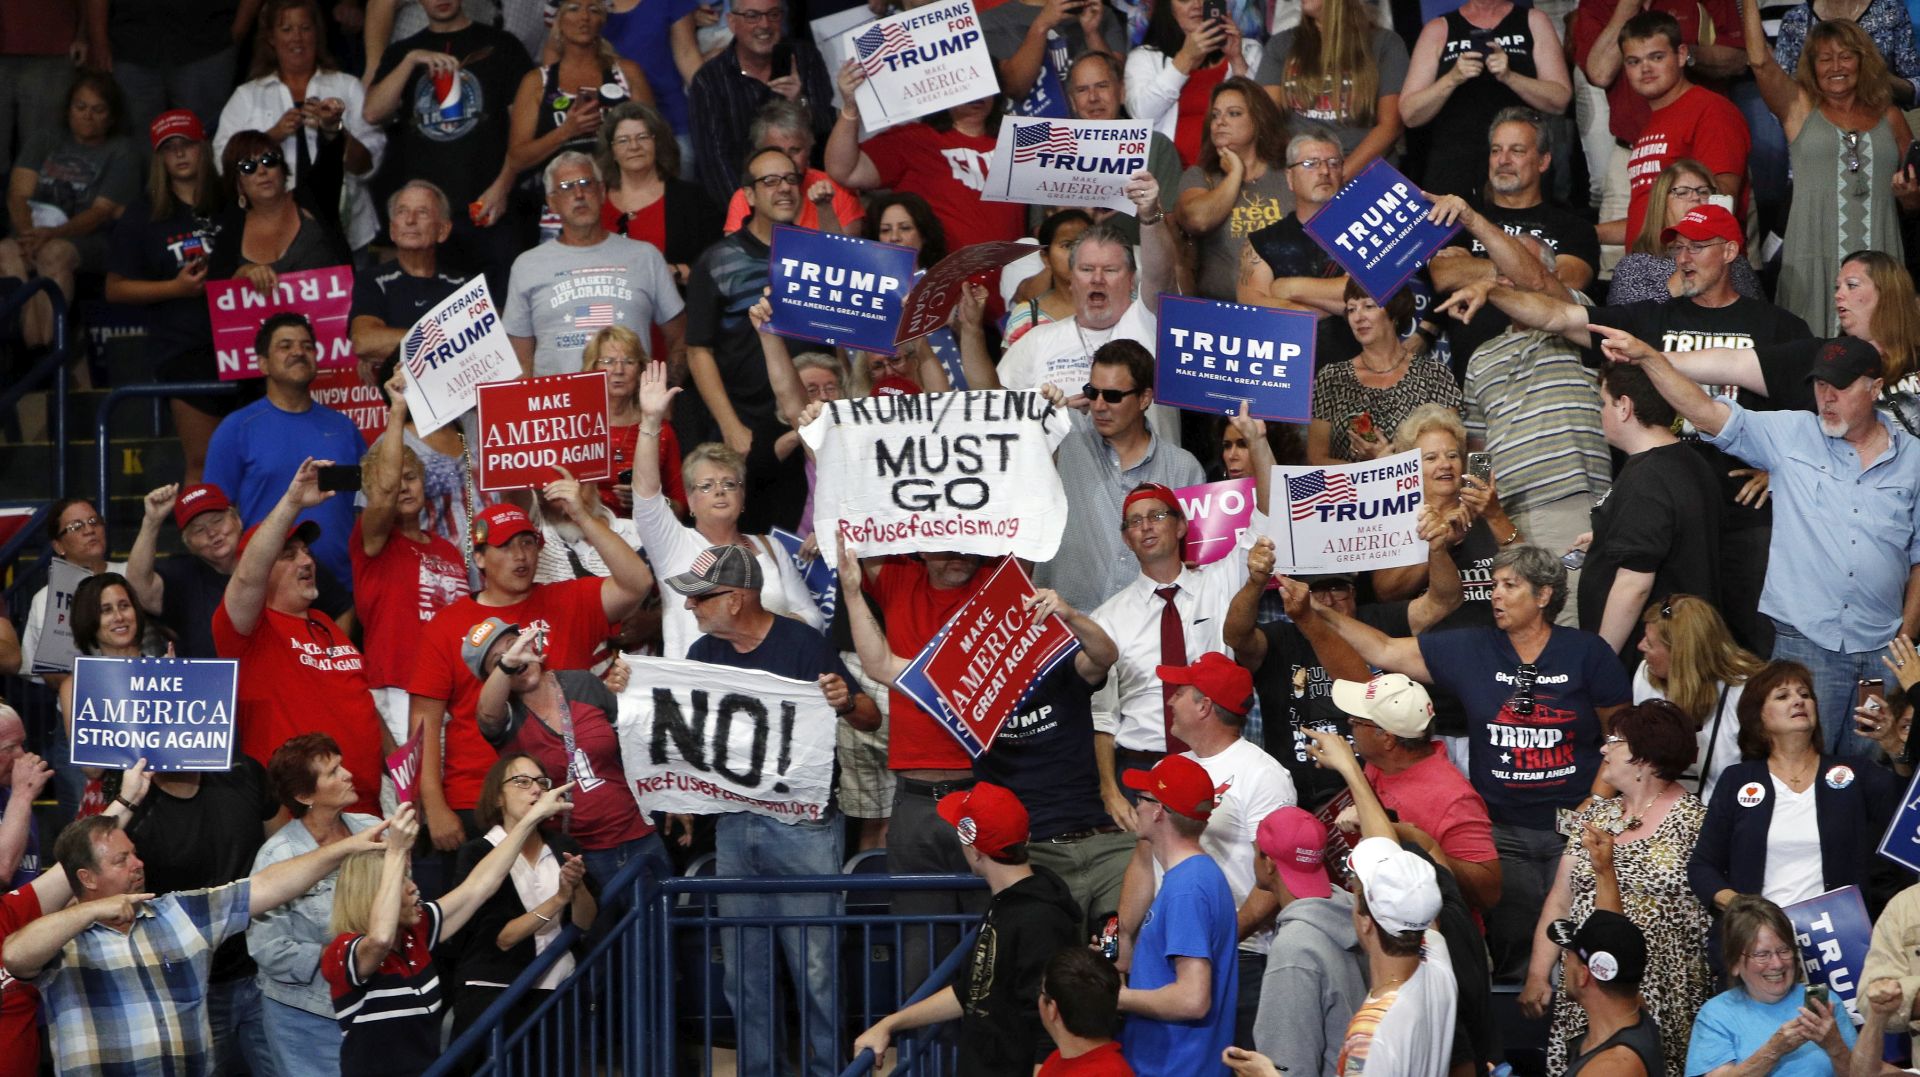 epa06109746 Protesters in the crowd (C) hold signs before being removed by the security as US President Donald J. Trump (not pictured) speaks at a 'Make America Great Again' rally at the Covelli Centre in Youngstown, Ohio, USA, 25 July 2017. Protest banners read 'TRUMP/PENCE MUST GO' and 'NO!'.  EPA/DAVID MAXWELL